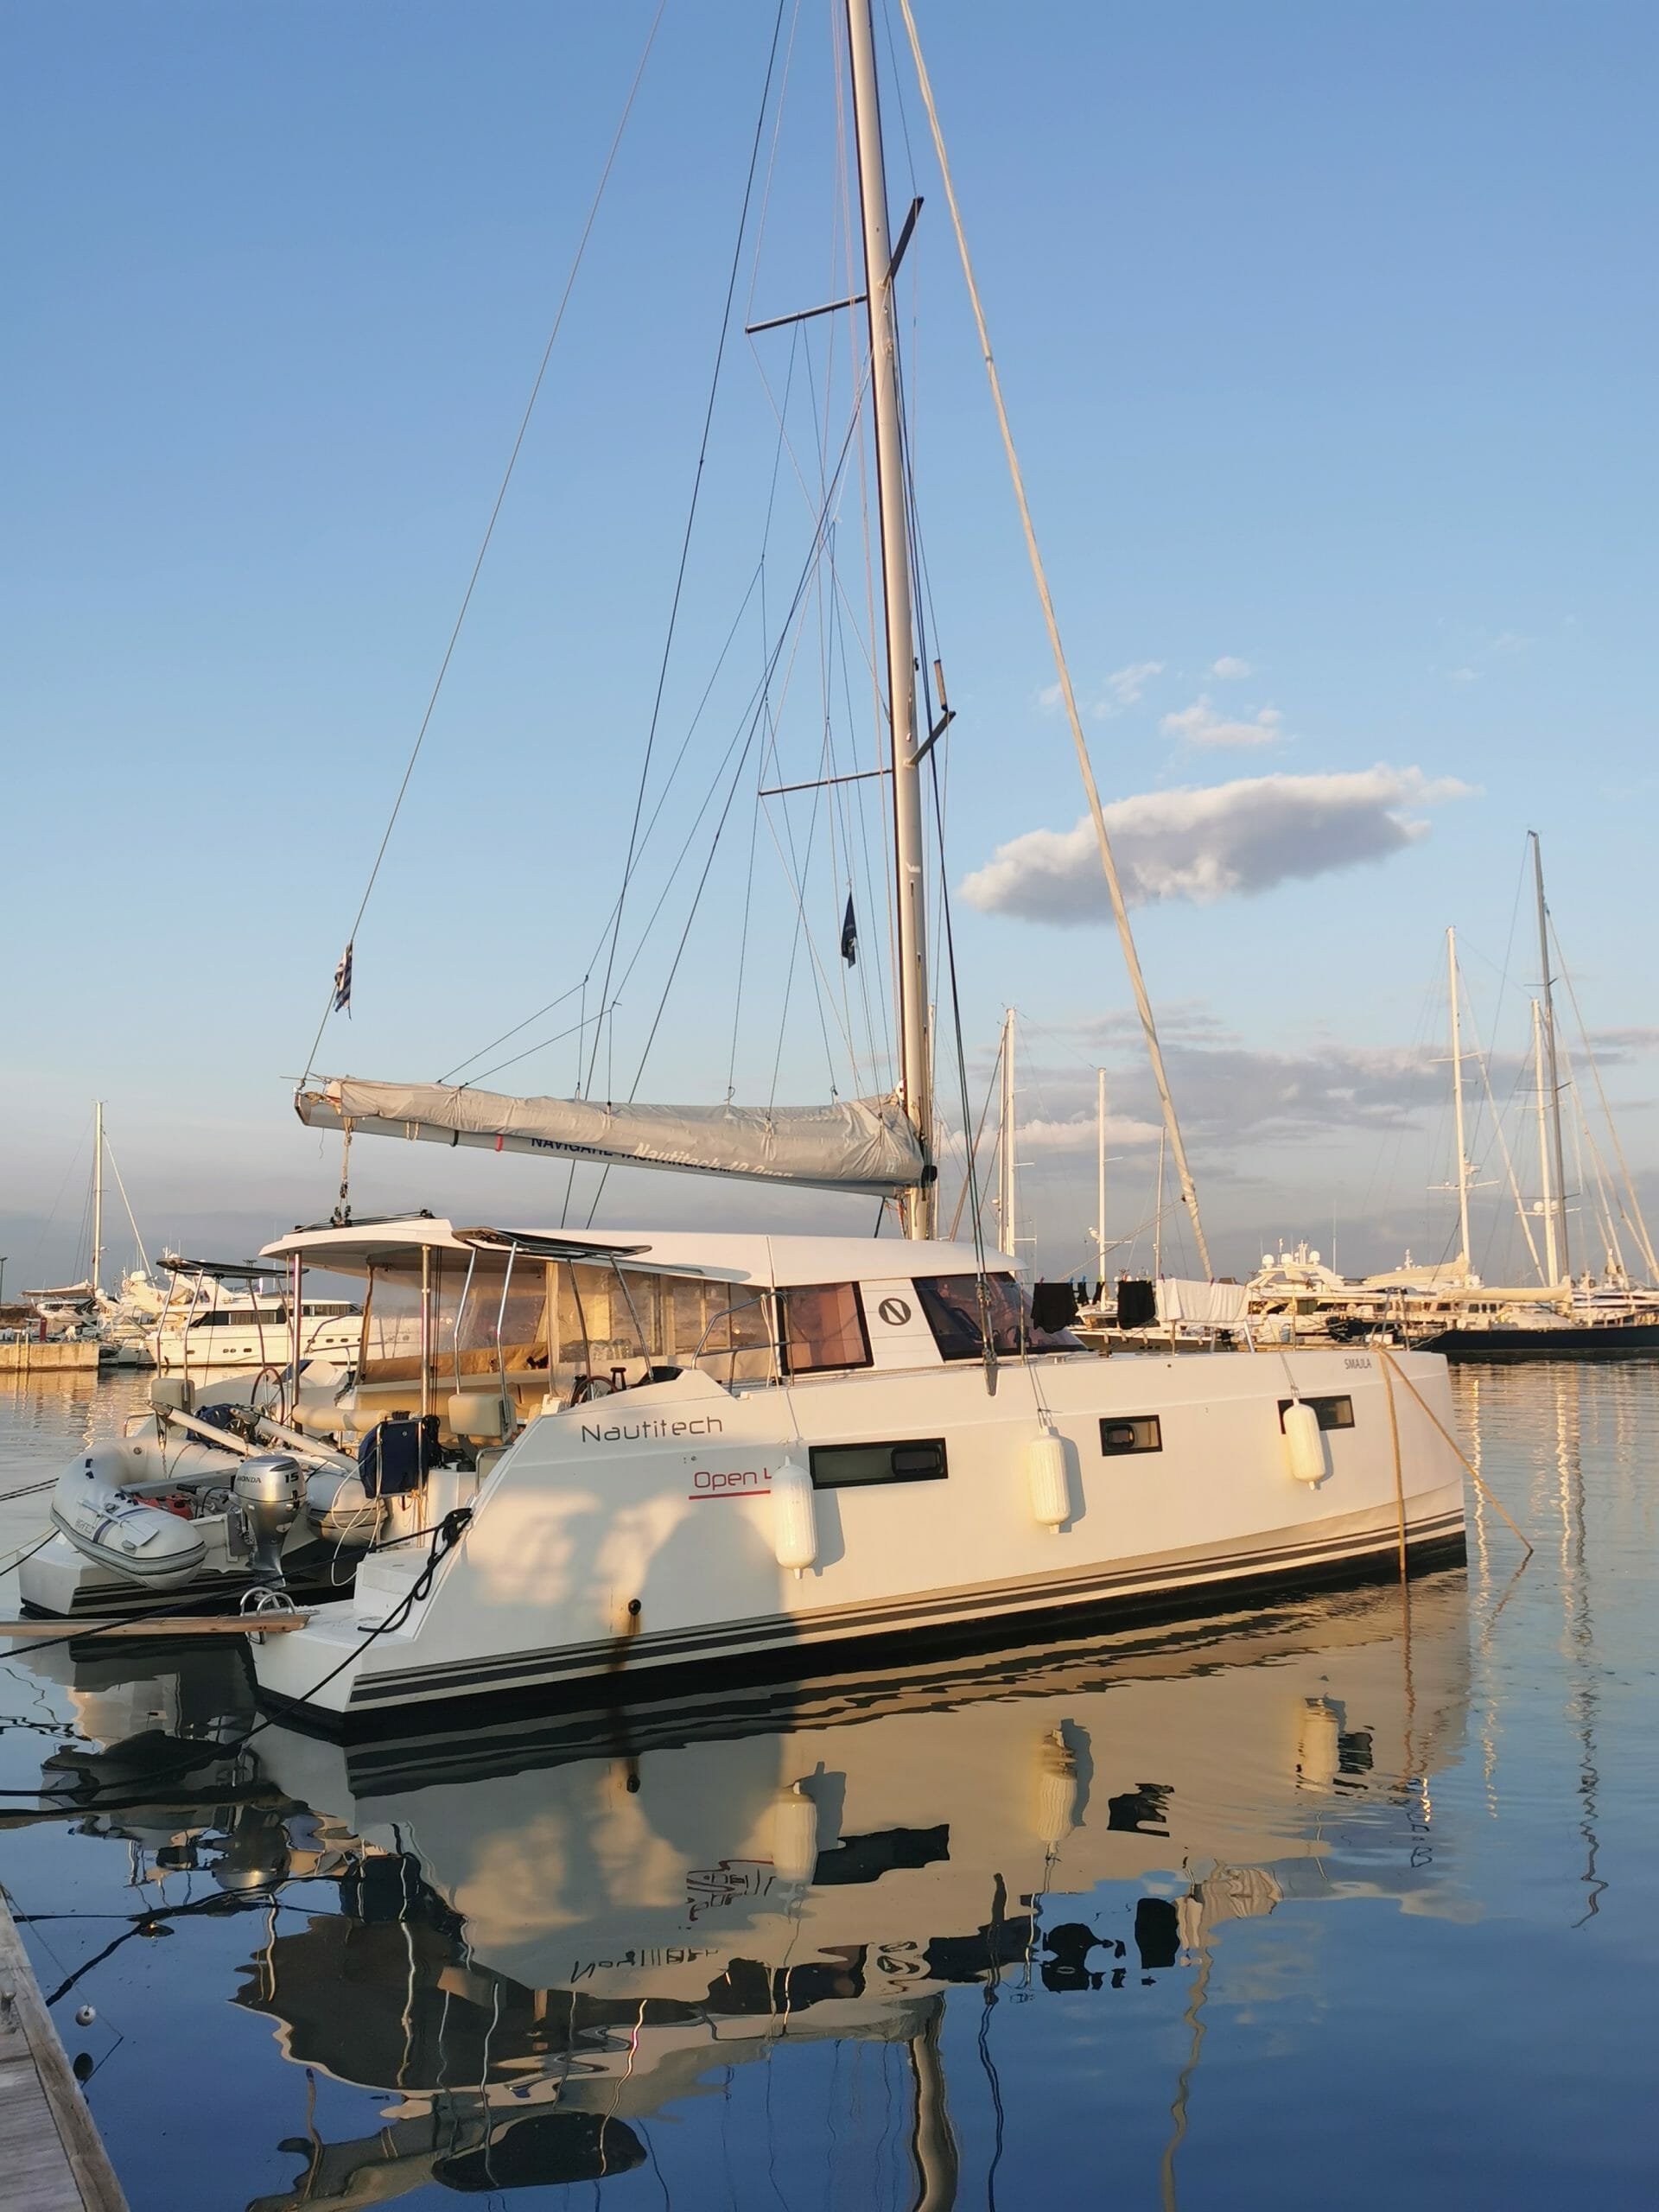 Dream Yacht Charter Reviews: Unbiased Insights for Your Ultimate Sailing Experience